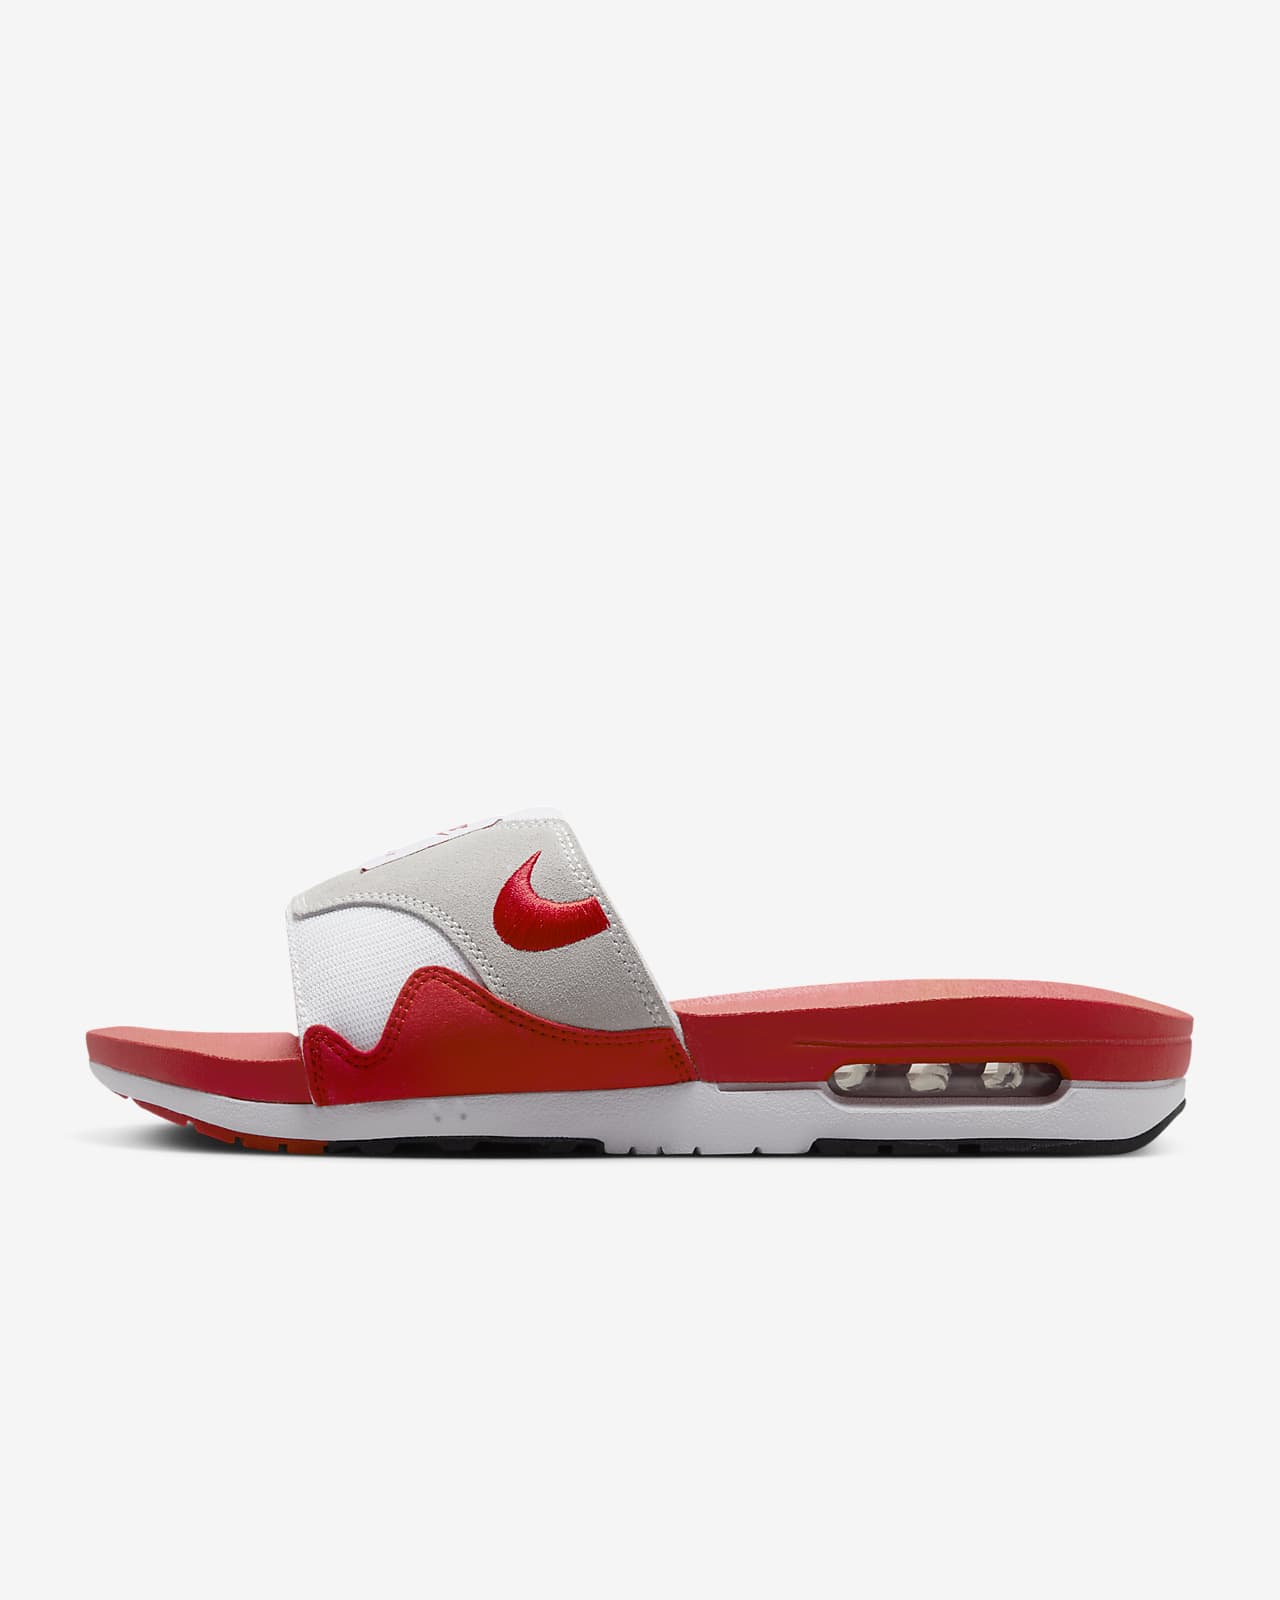 Buy Nike Sandals online - 94 products | FASHIOLA.in